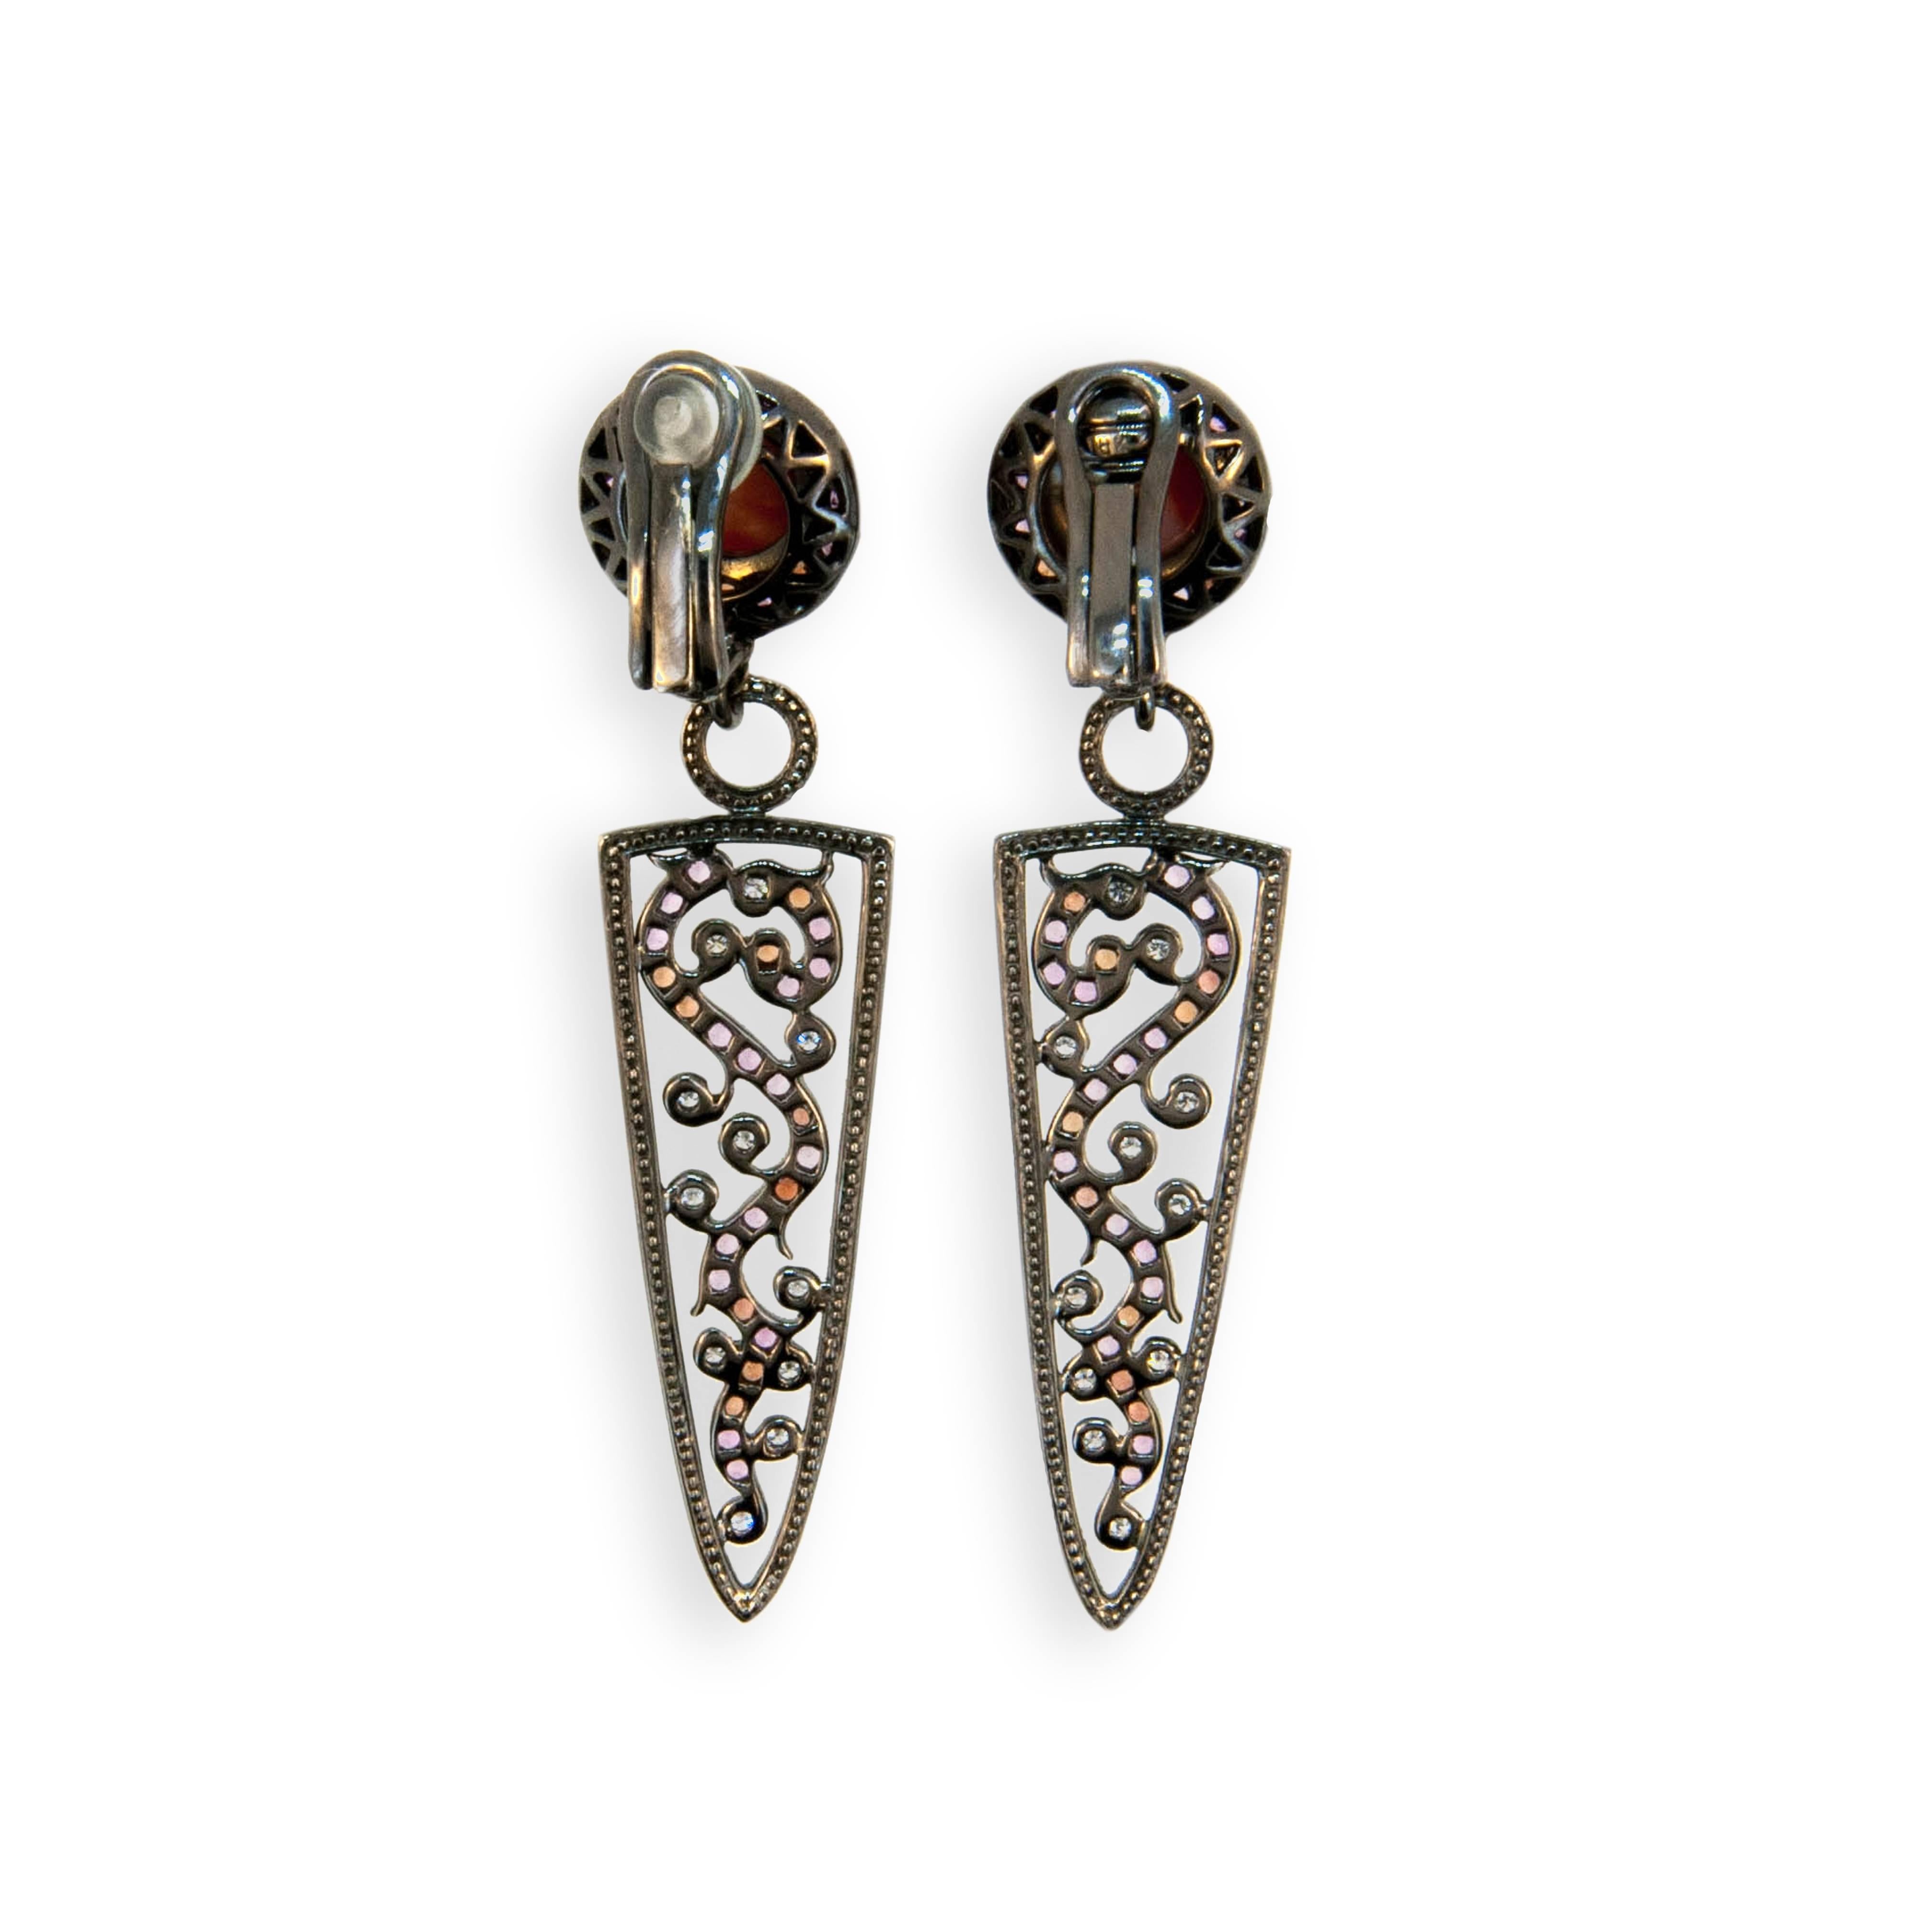 18 karat white gold blackened earrings each set with 8 mm cabochon coral weighing approx. 3.78 carats total weight, (52) pink sapphires weighing approximately 1.18 carats total weight, (30) orange sapphires weighing approximately .62 carats total